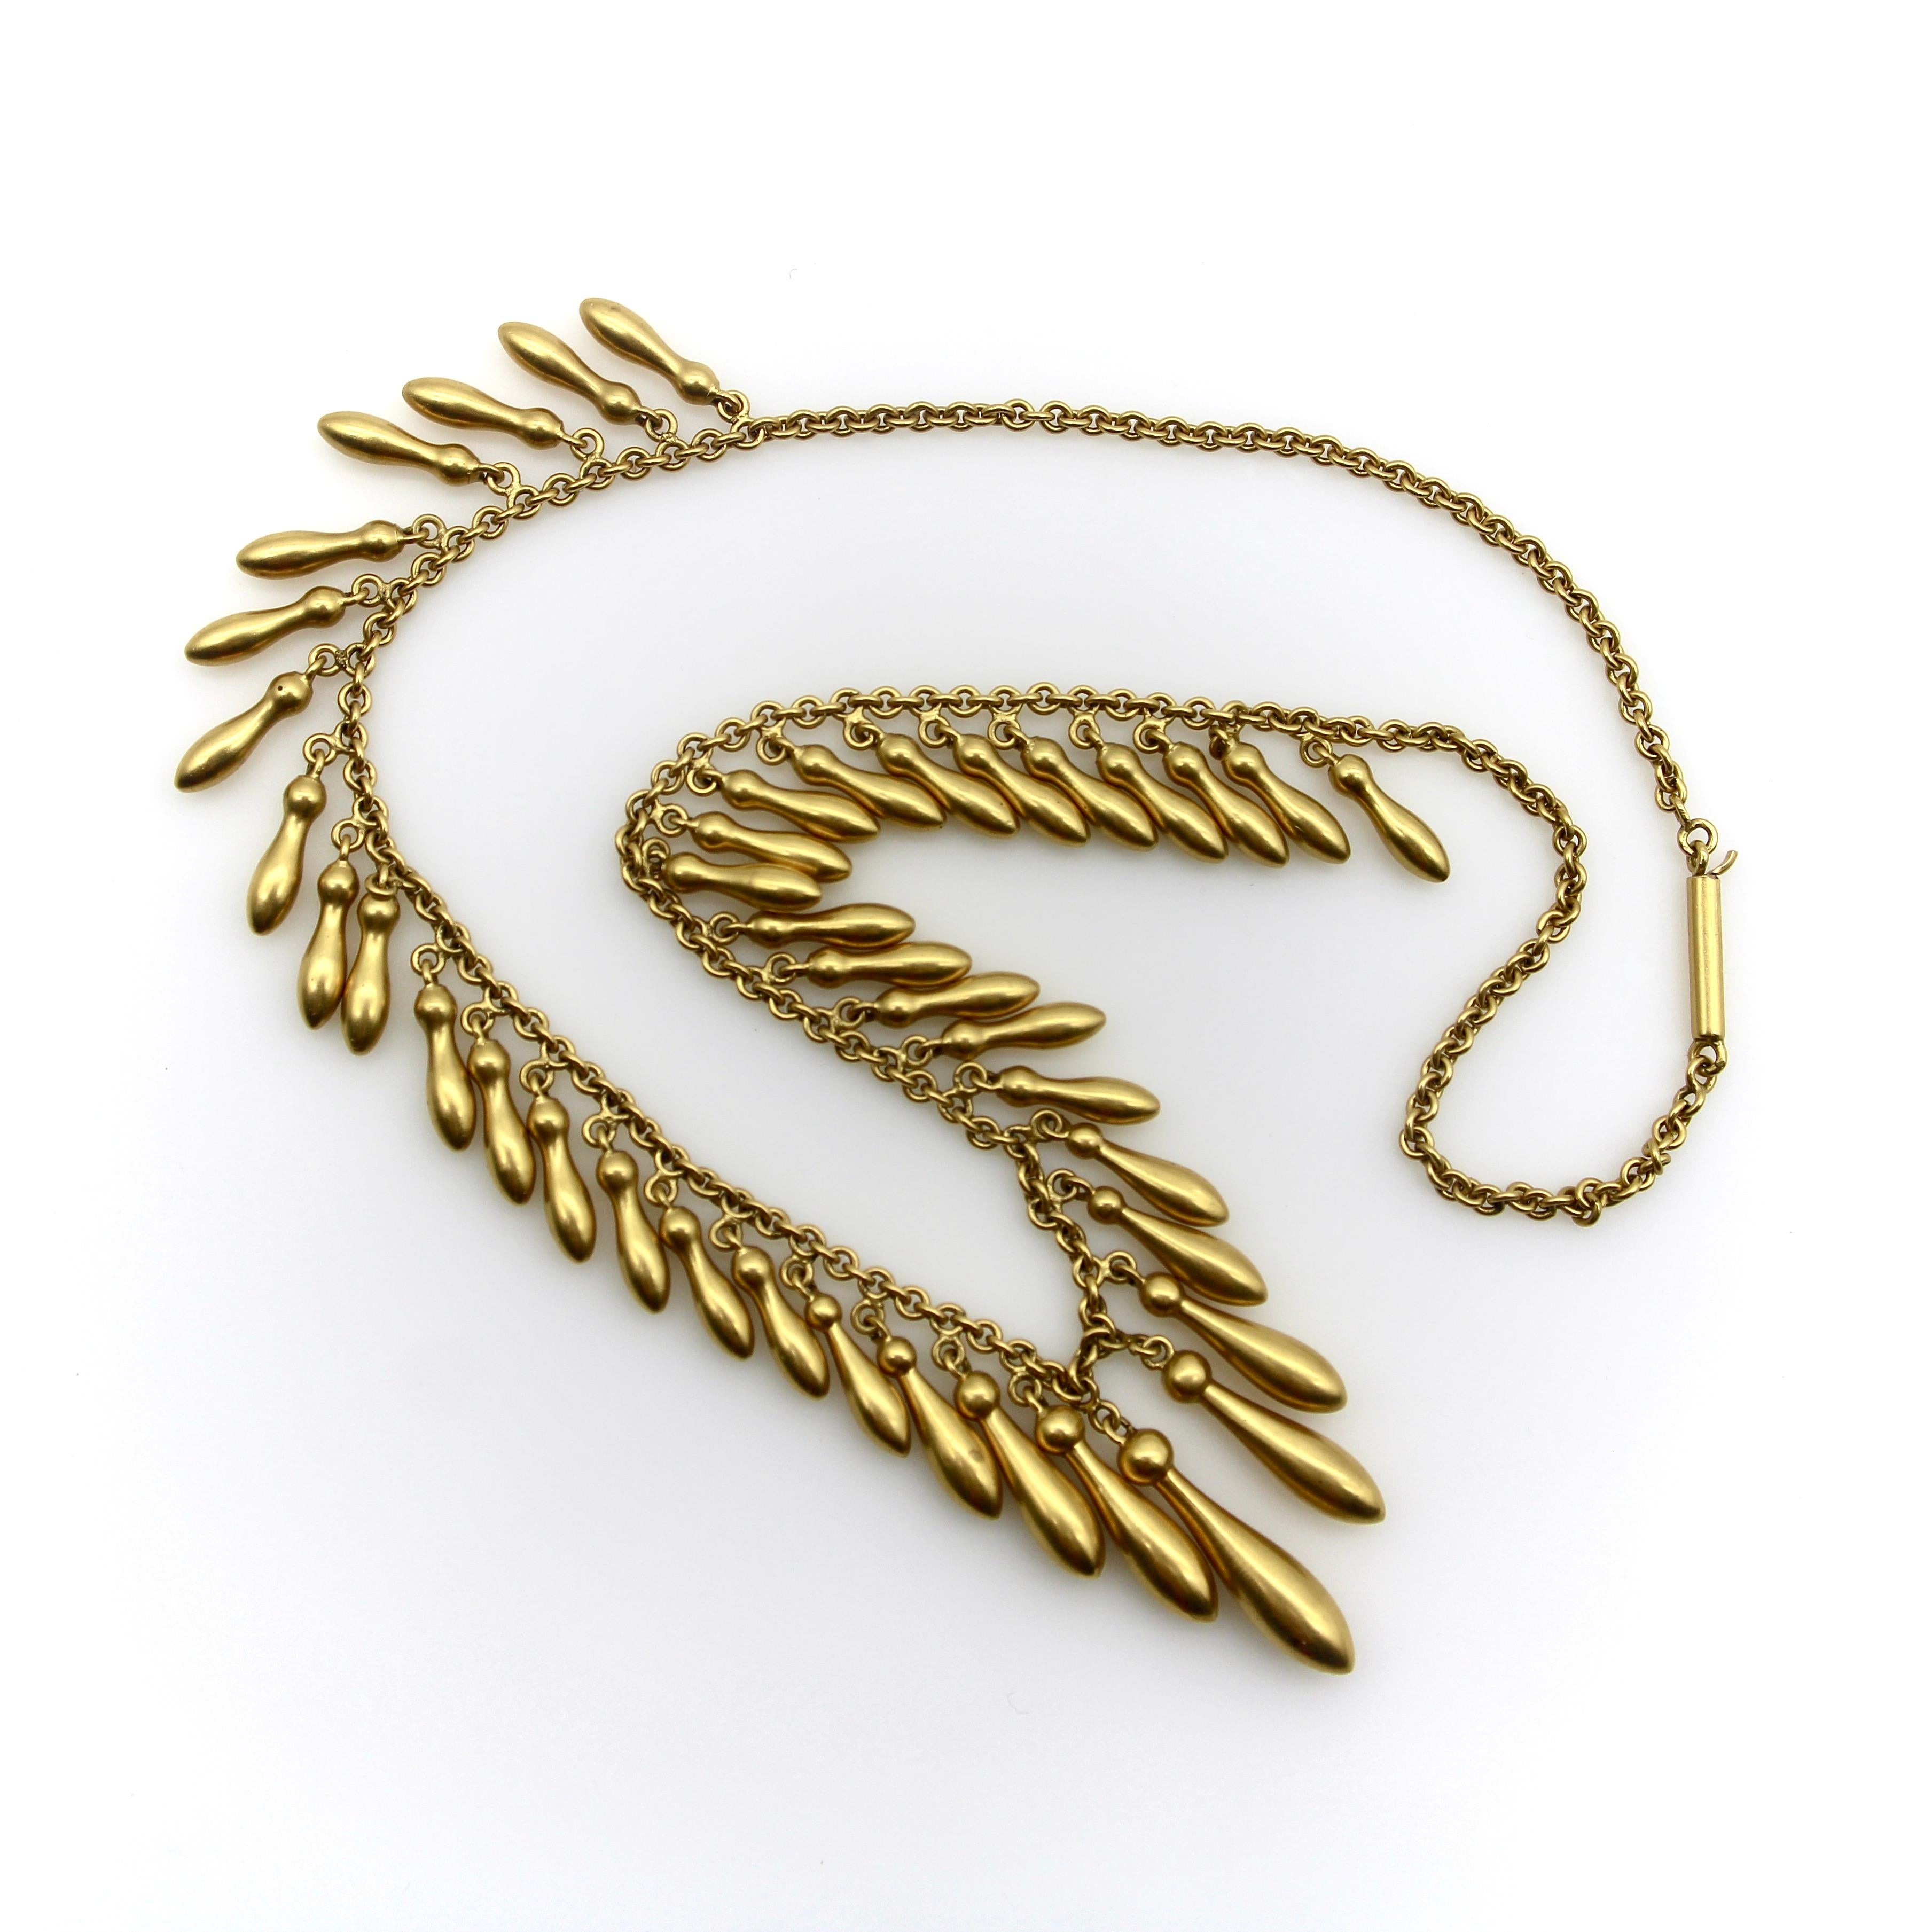 This 14k gold fringe necklace encapsulates the essence of romantic jewelry from the Victorian era. Graduated elongated drops topped with round spheres dangle from the 15” necklace. The gorgeous surface of the gold is what is known as a bloom